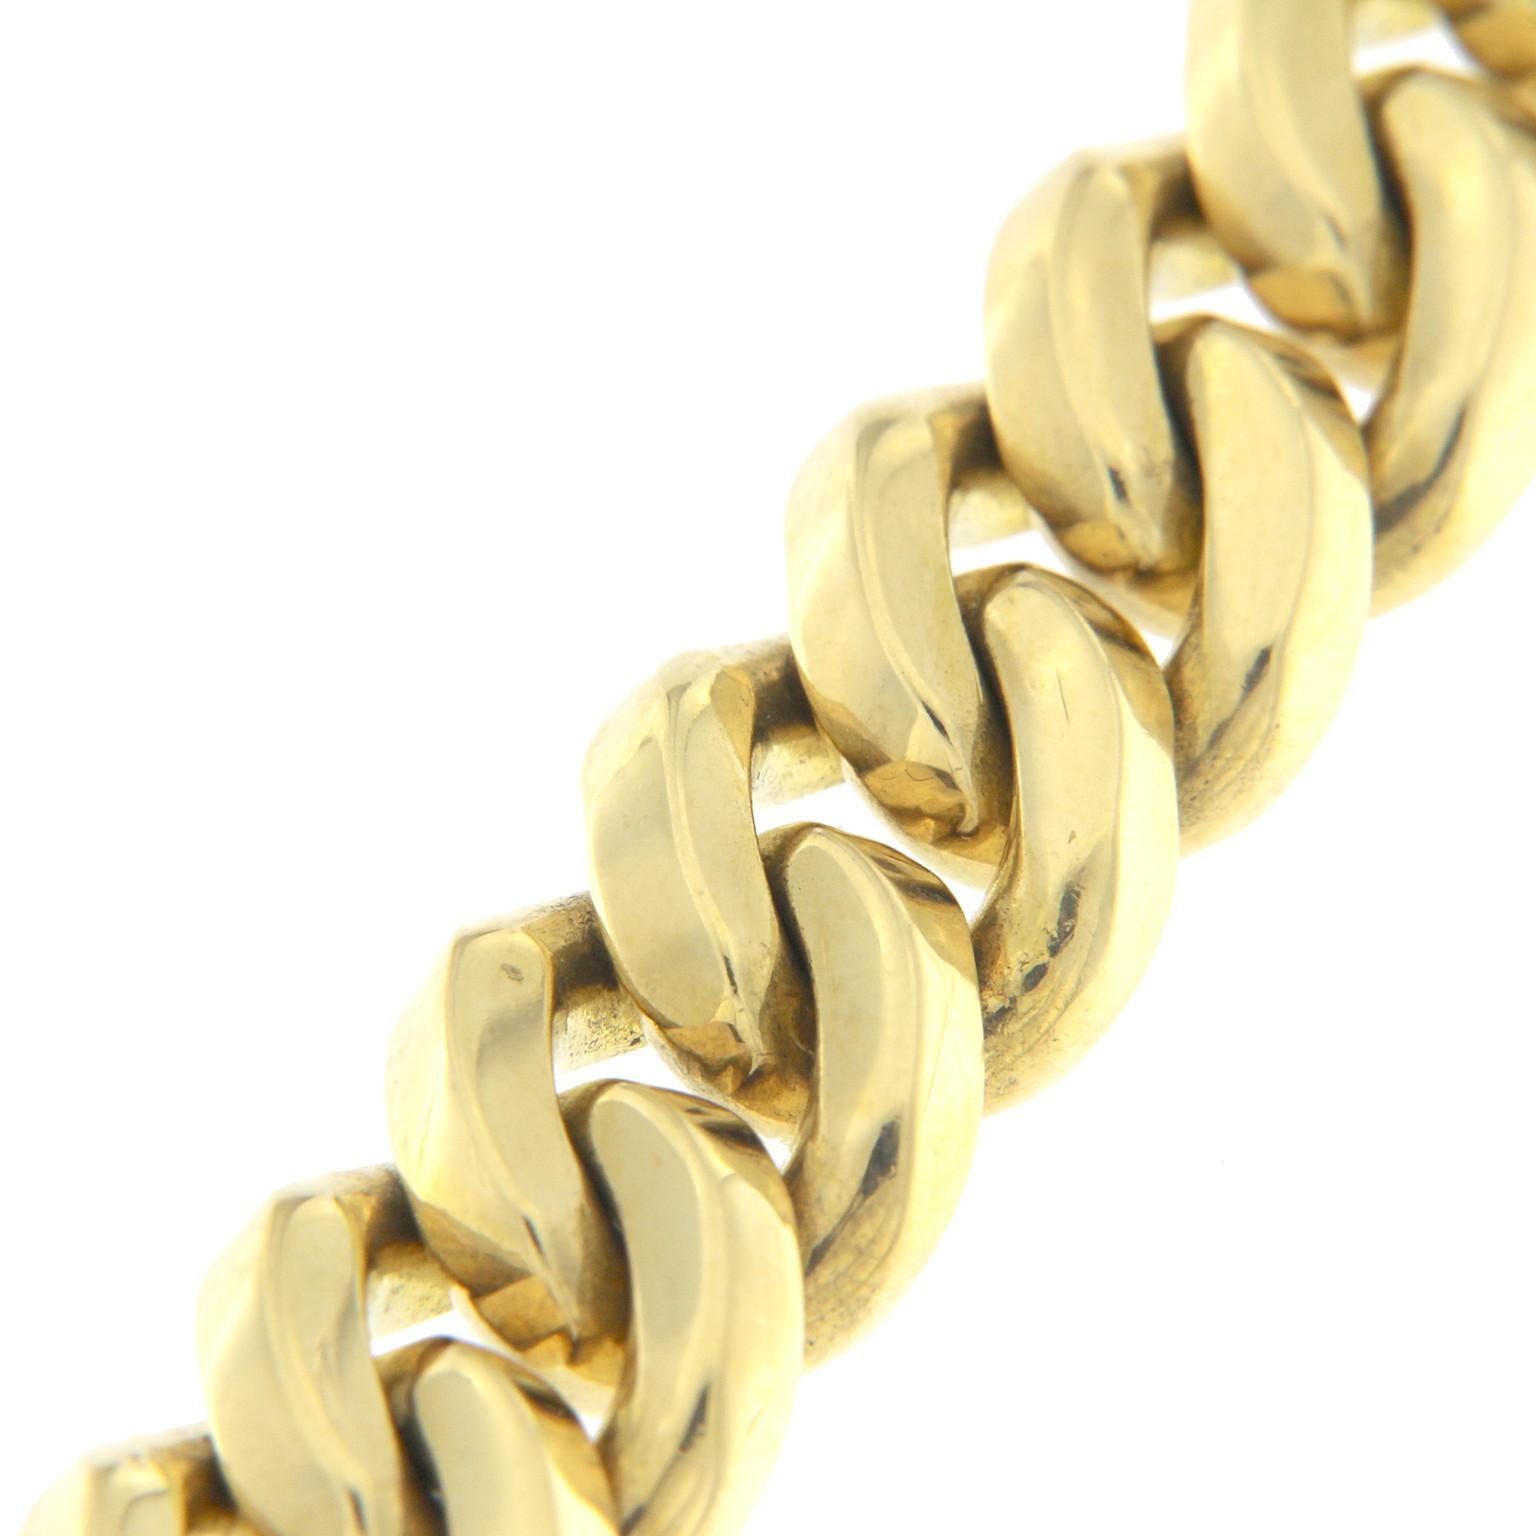 Groumette style coupled chain bracelet with great visual effect
Total weight of yellow gold 18 kt gr 69,50
Stamp 750

